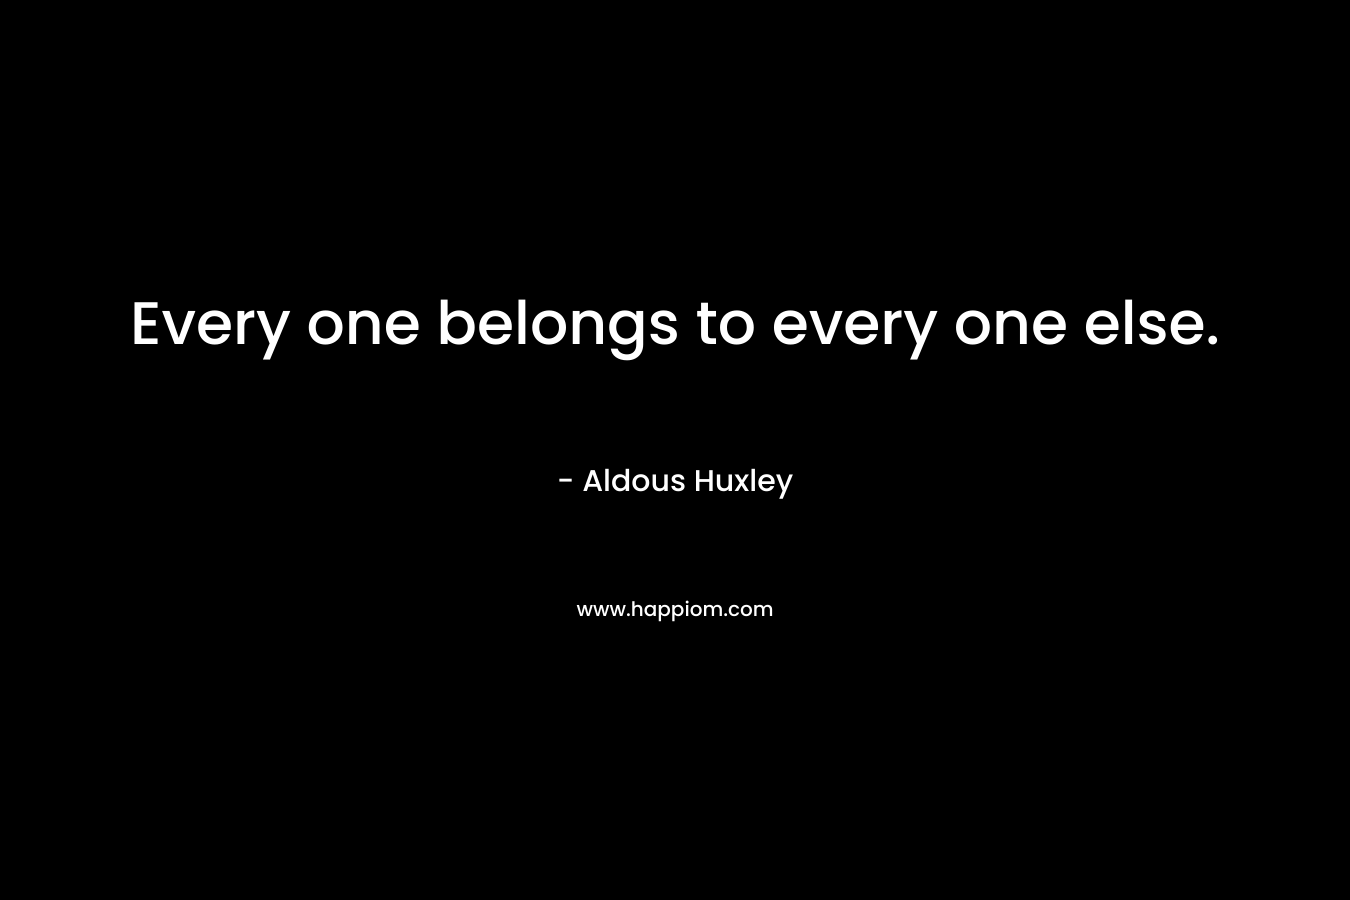 Every one belongs to every one else.